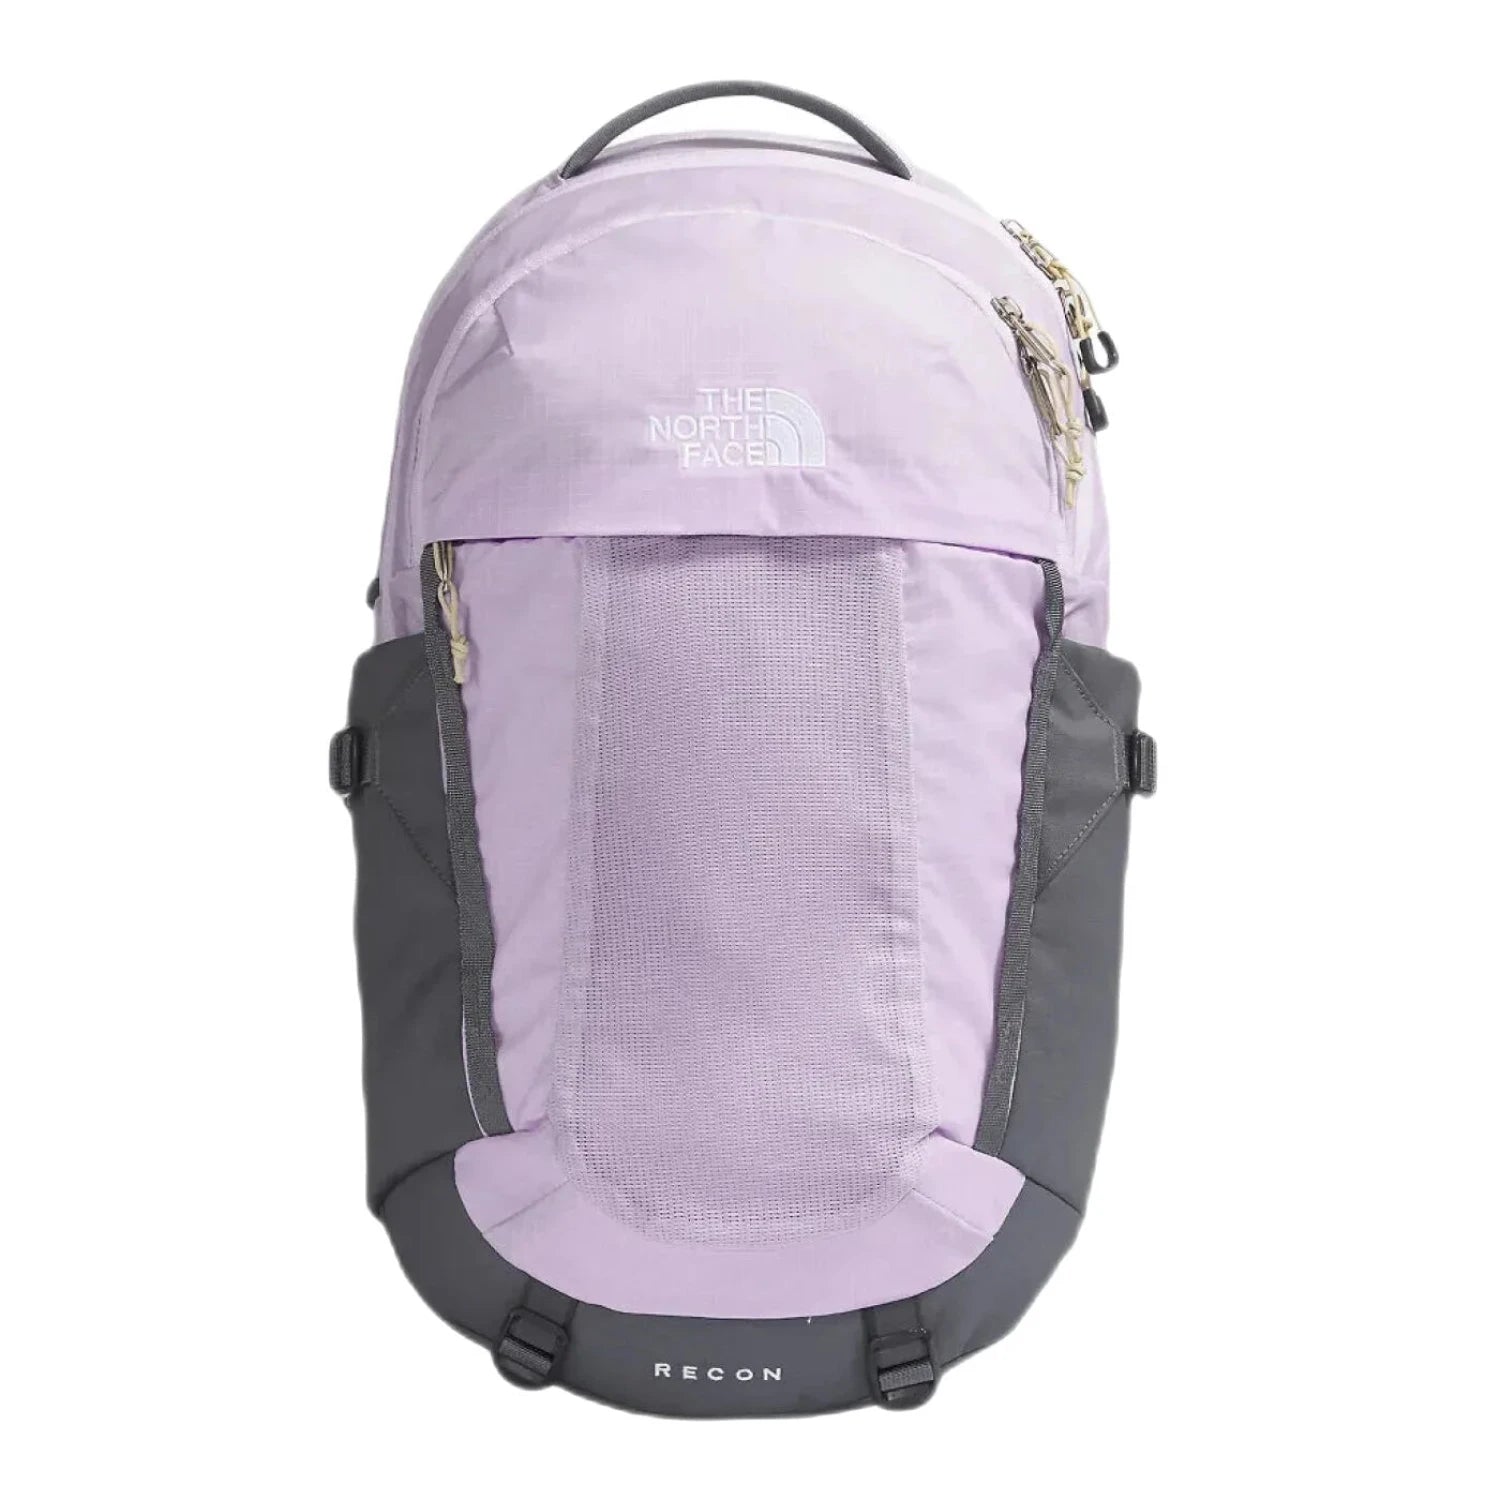 The North Face Women's Recon Backpack Steel Blue Ice Lilac Front